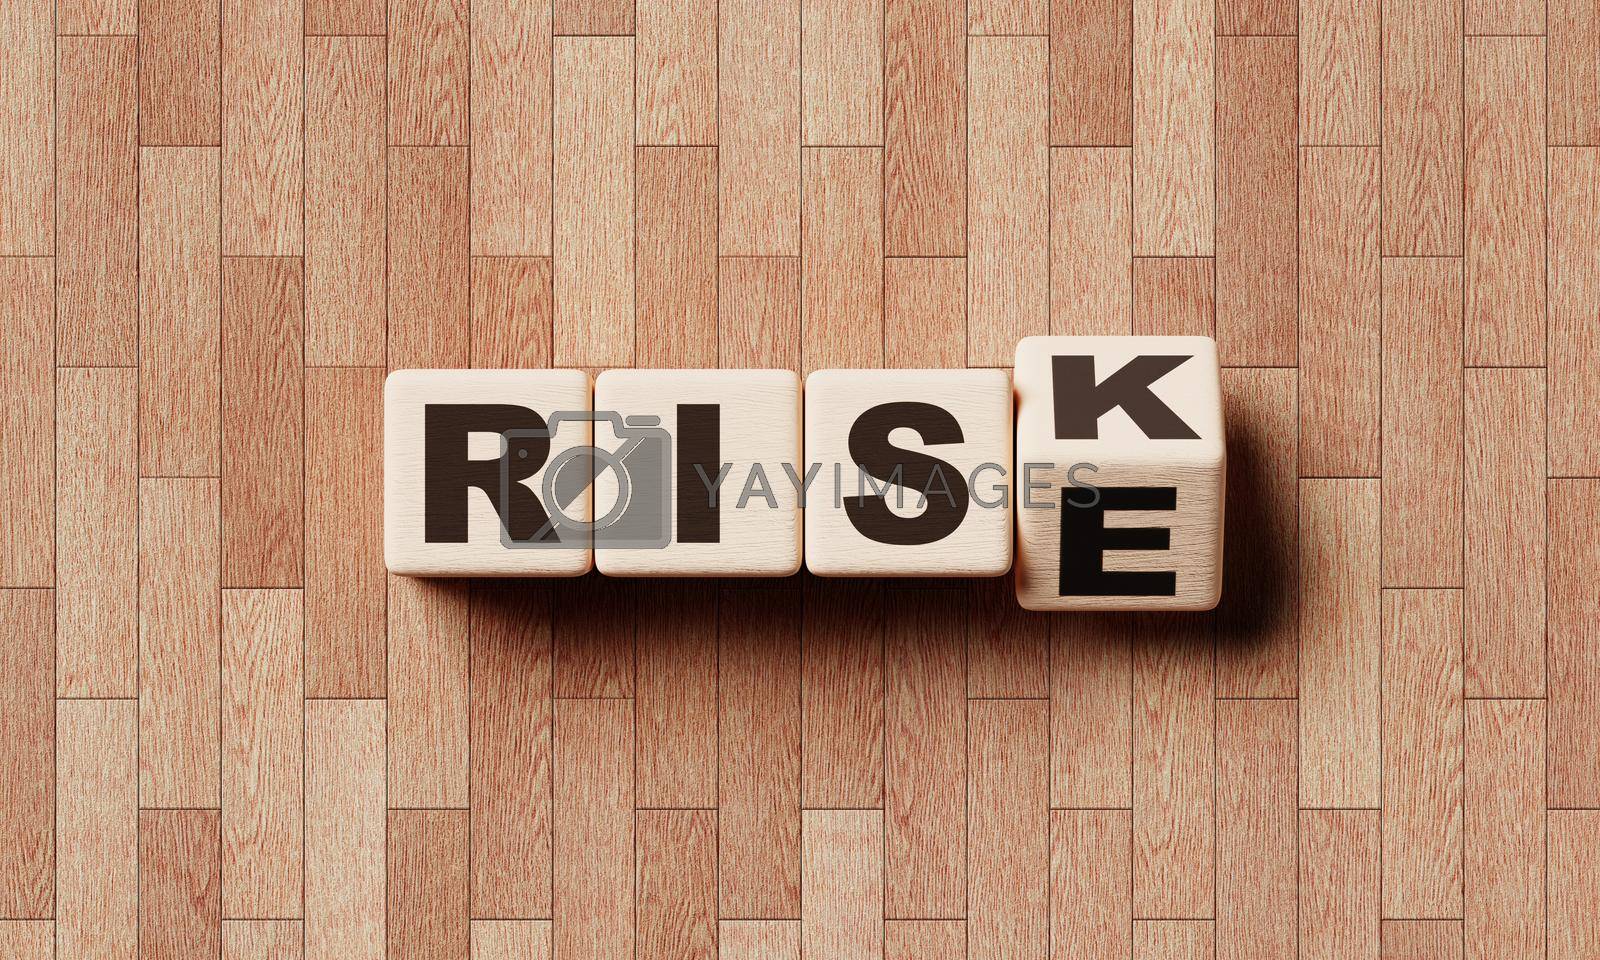 Royalty free image of Risk and rise wooden block cube on laminate floor. Financial risk management and business economy growth performance concept. Planning strategies and achieving goals theme. 3D illustration rendering by MiniStocker